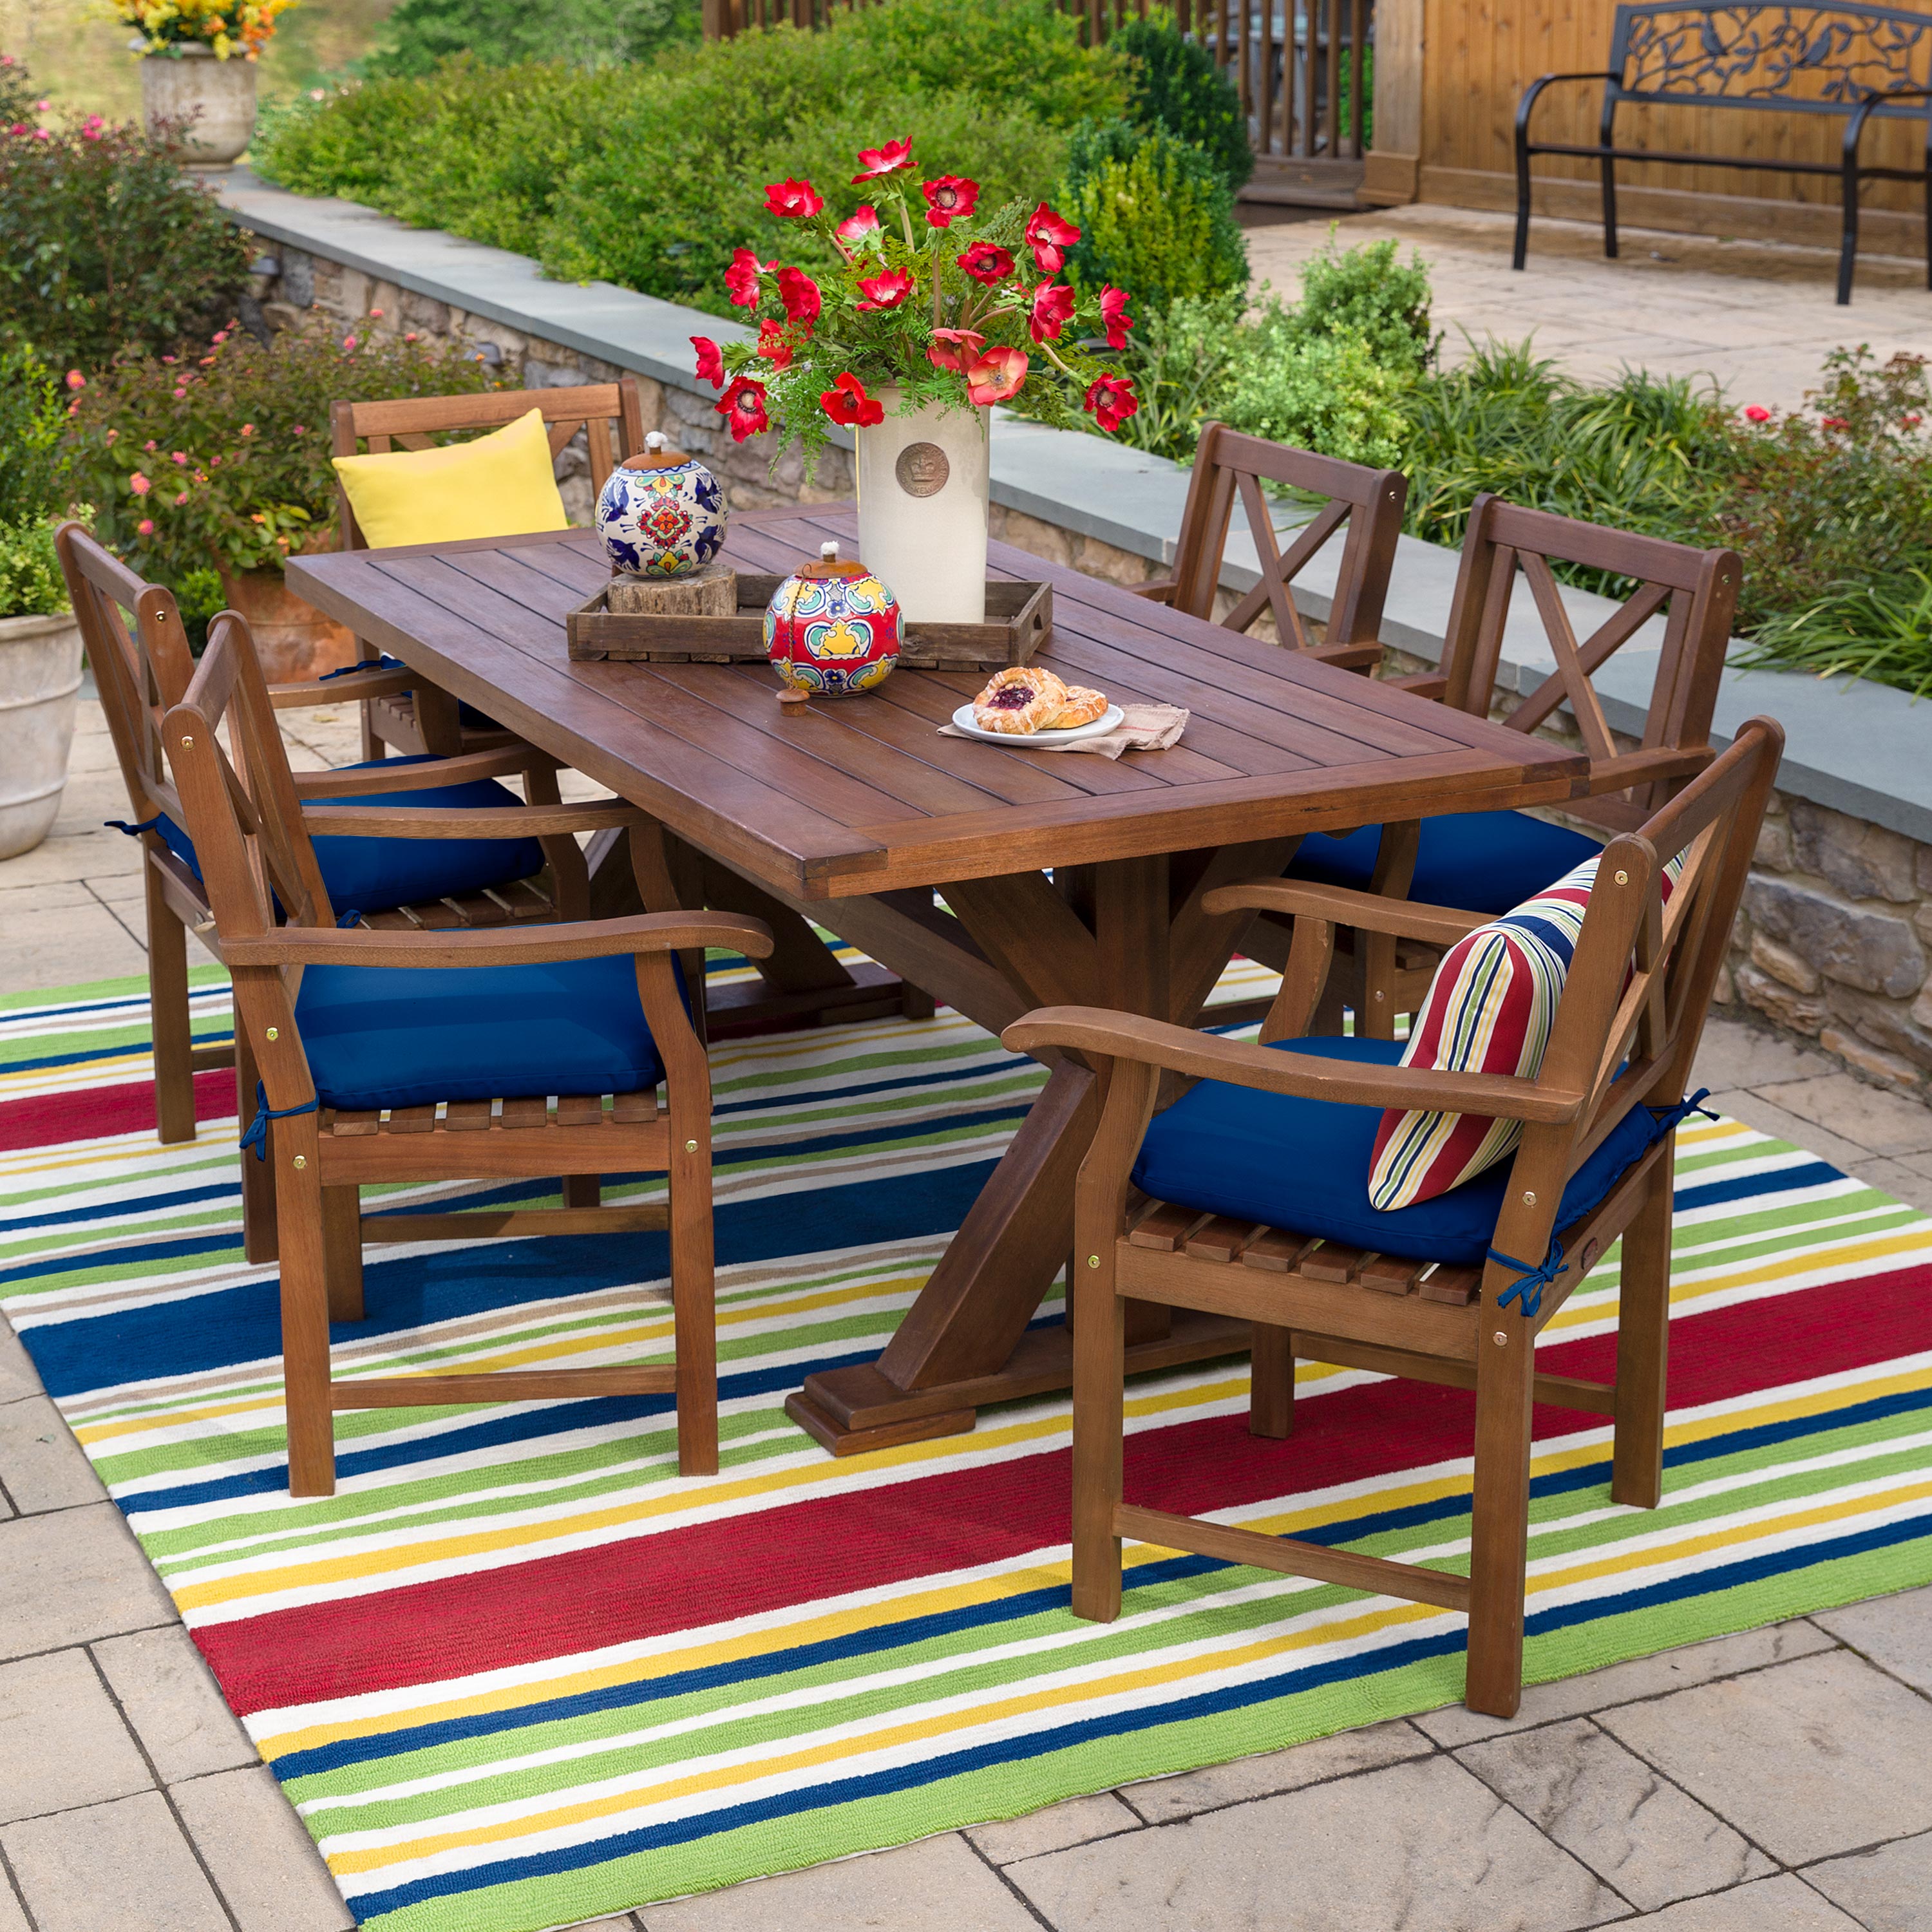 Claremont Outdoor Dining Furniture, Eucalyptus Table and Chairs